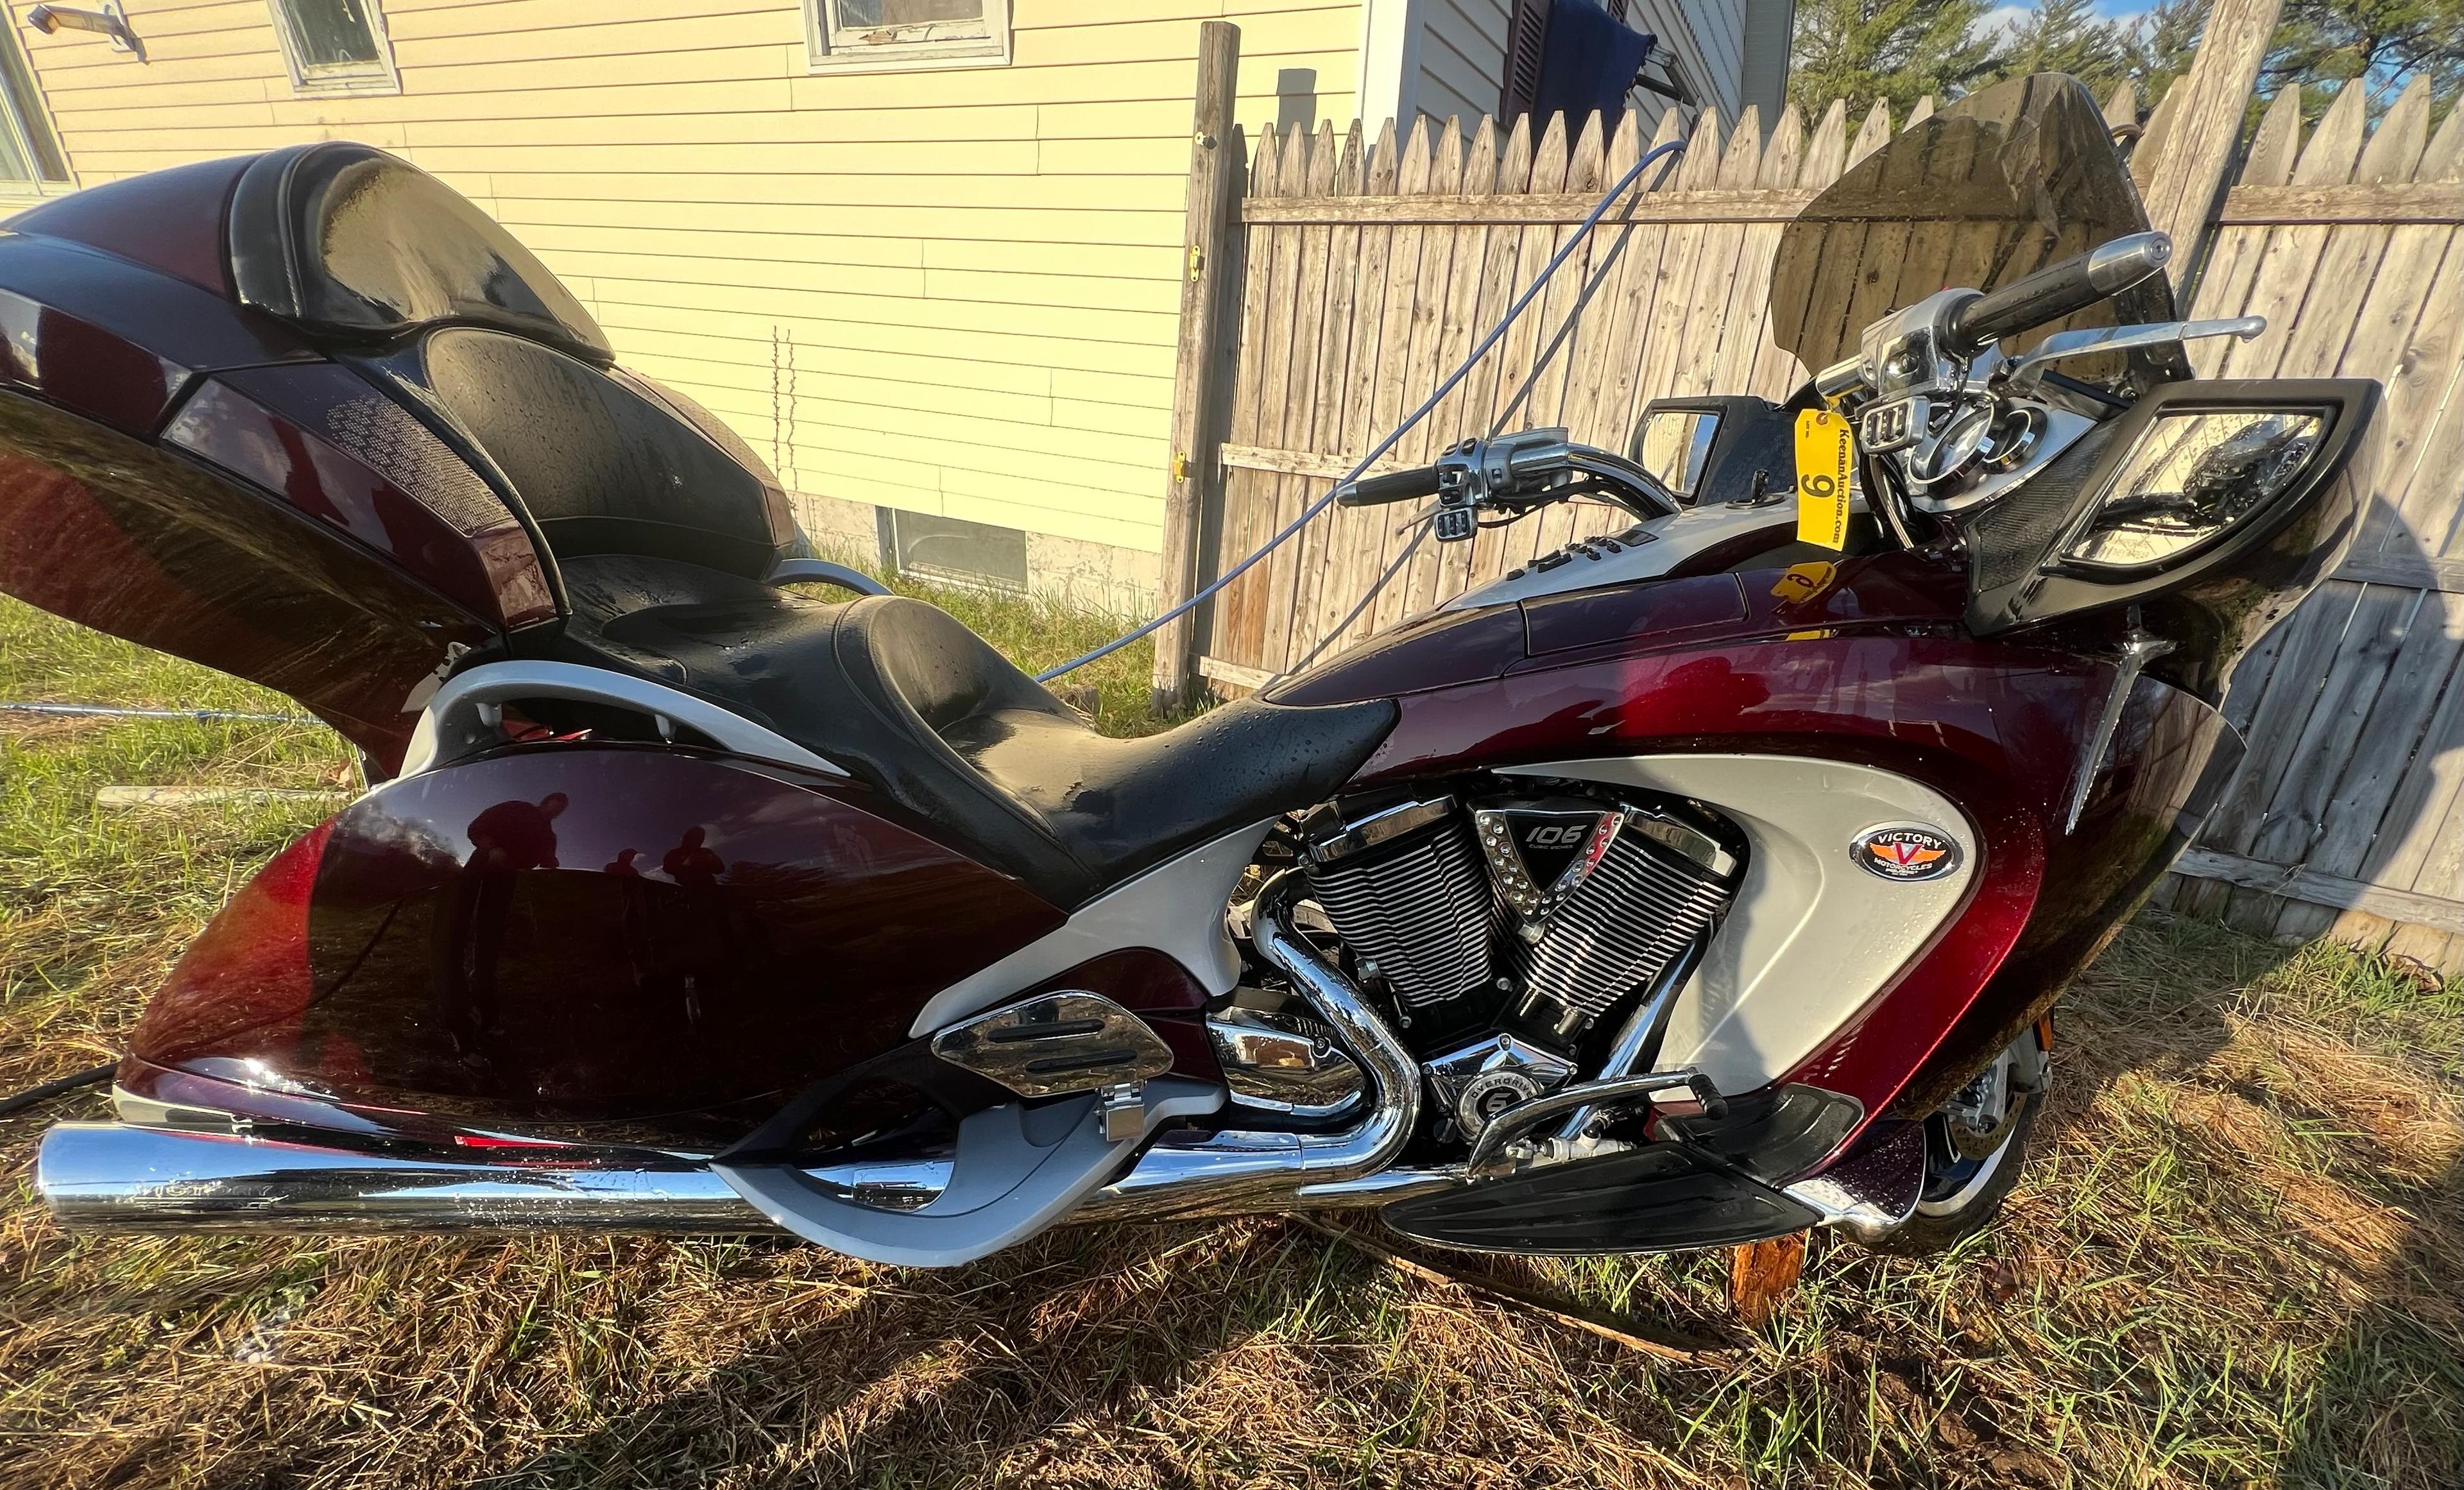 NOT STARTED - 2008 VICTORY VISION TOURING MOTORCYCLE, 106 CU. IN., 1731CC, VIN: 5VPSD36D683007183